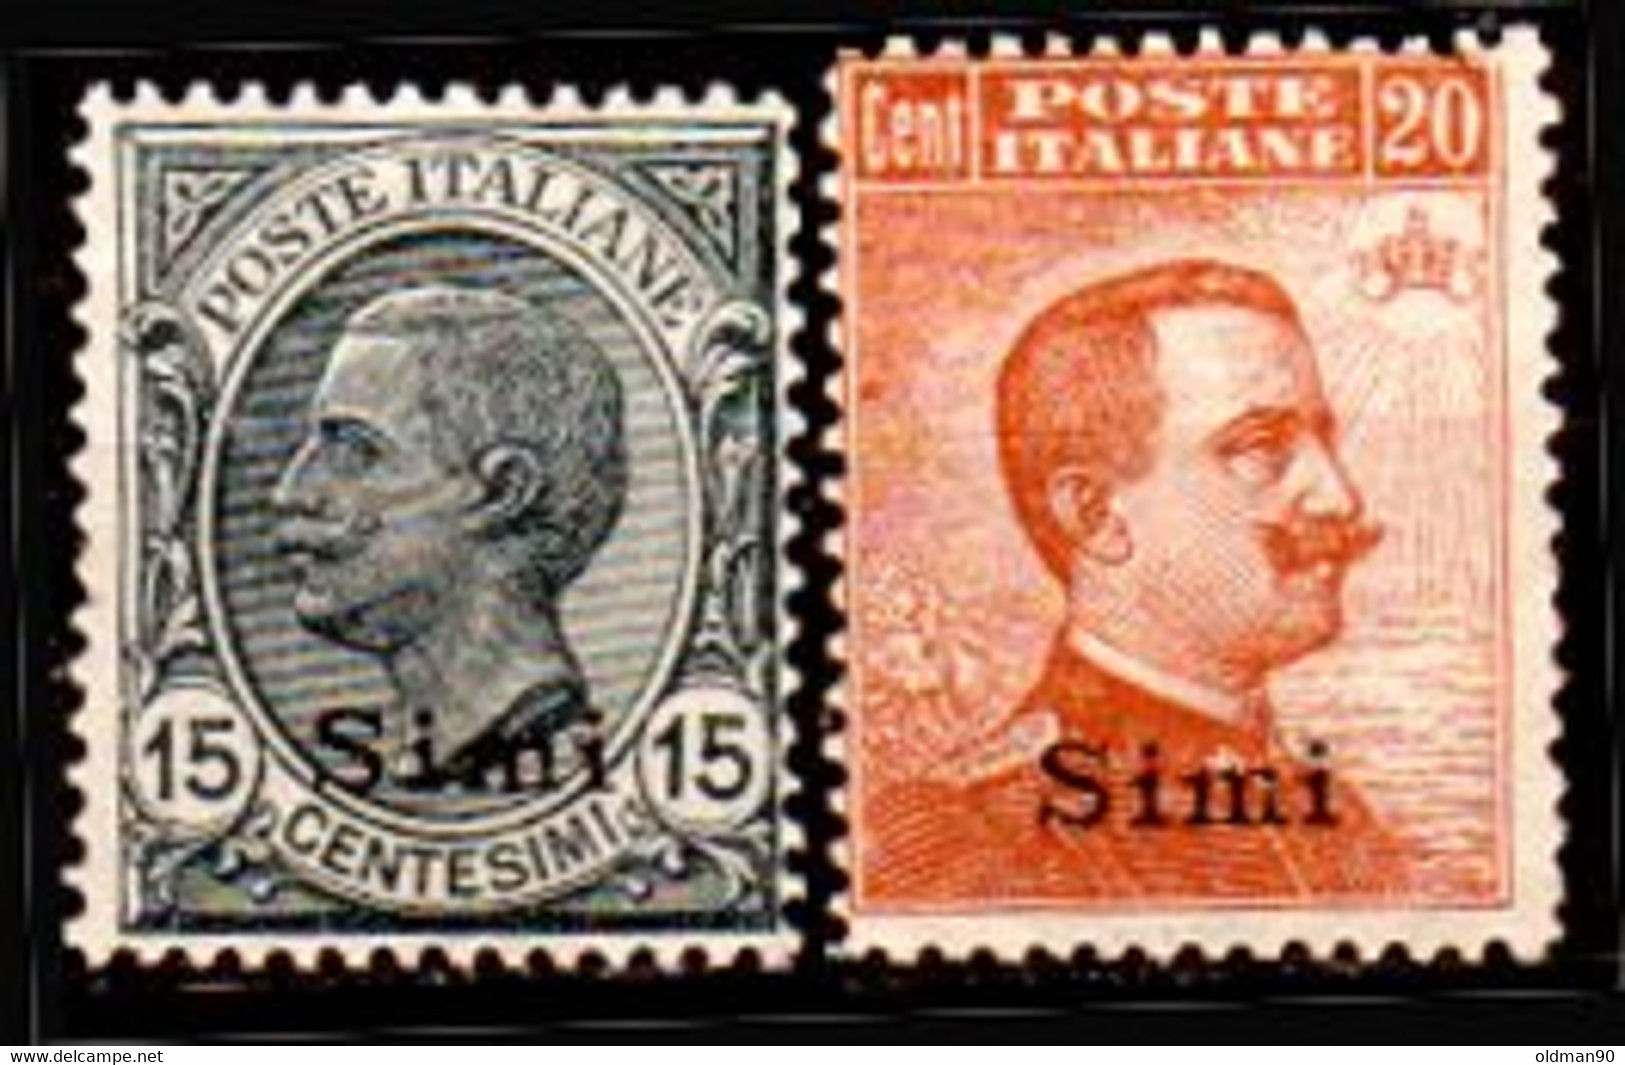 Egeo-OS-351- Simi: Original Stamps And Overprint 1921-22 (++) MNH - Quality In Your Opinion. - Ägäis (Simi)